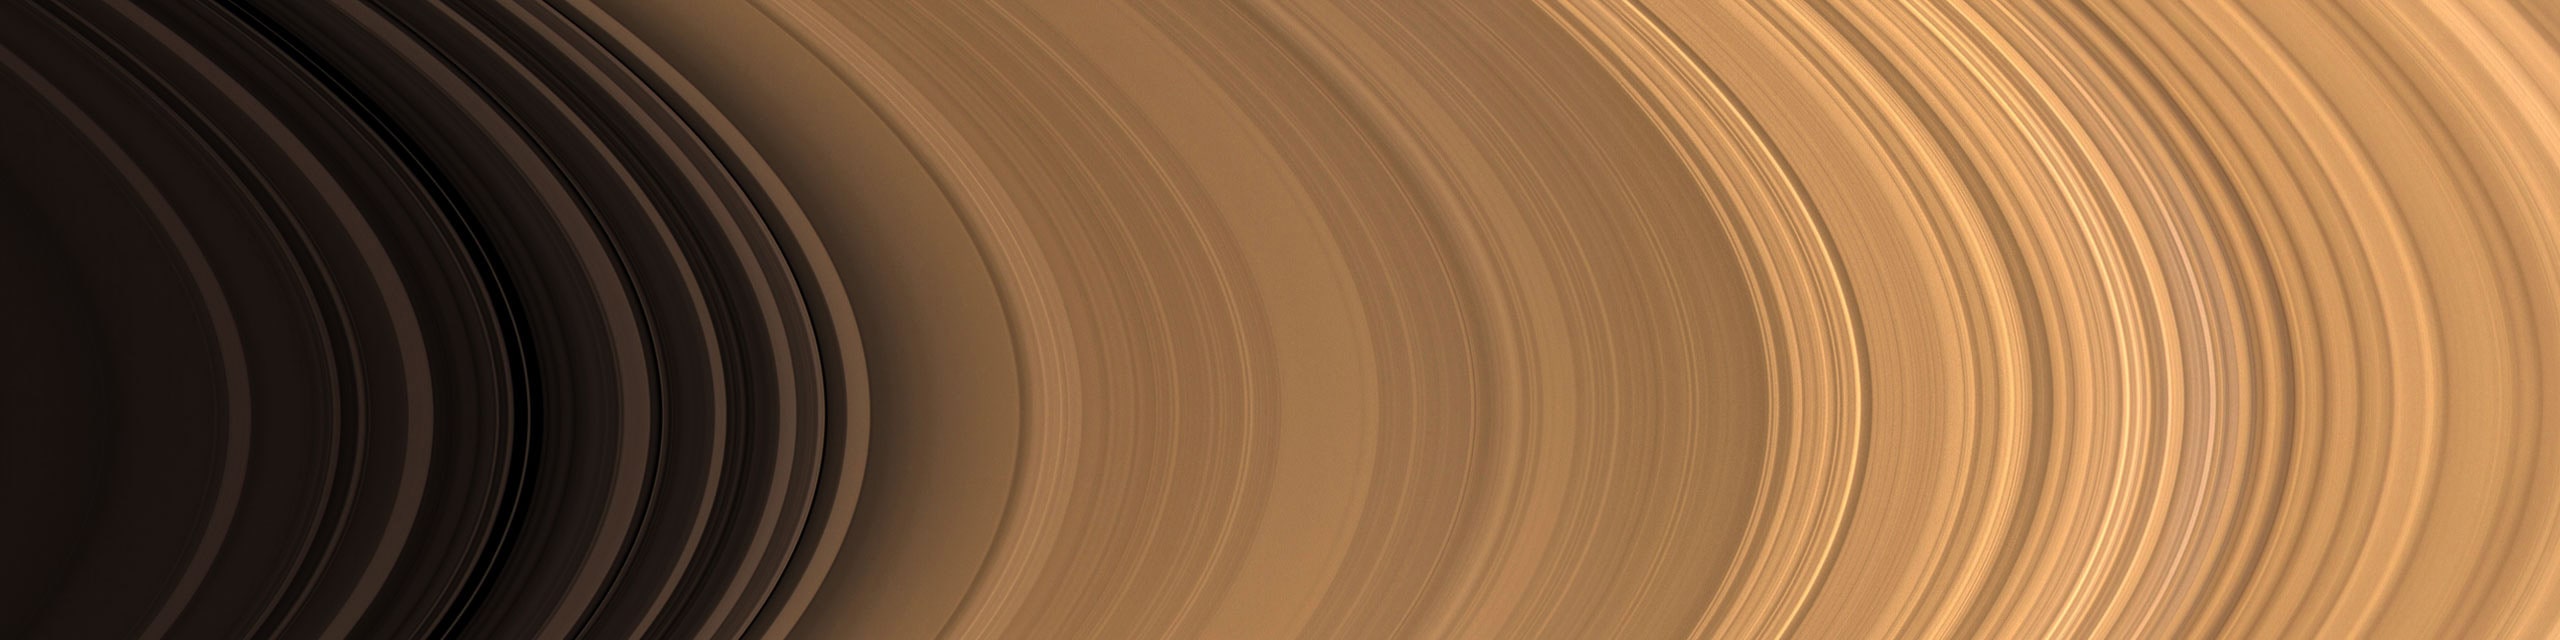 File:Solarsystemscope texture 8k saturn ring alpha.png - Wikimedia Commons